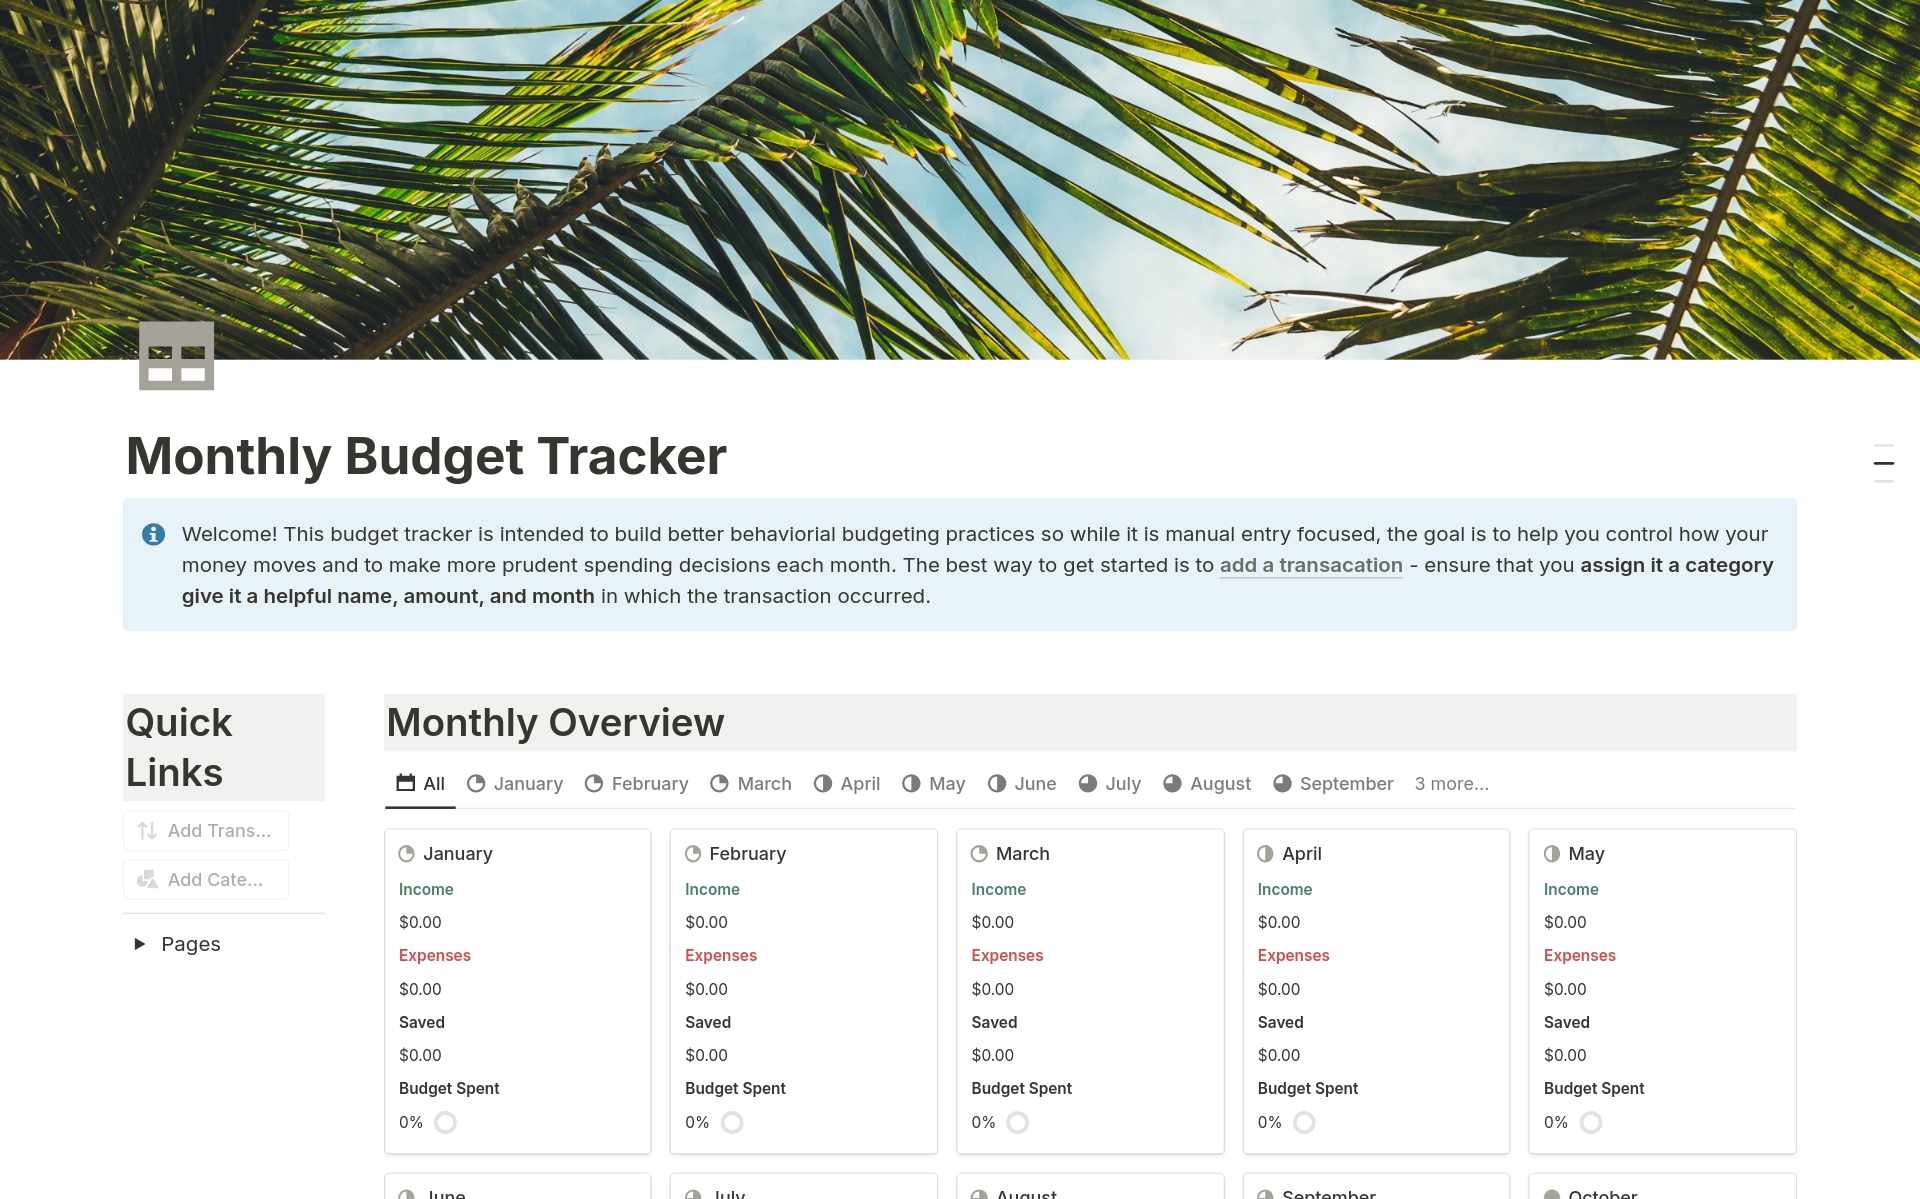 This budget tracker is intended to build better behaviorial budgeting practices so while it is manual entry focused, the goal is to help you control how your money moves and to make more prudent spending decisions each month.